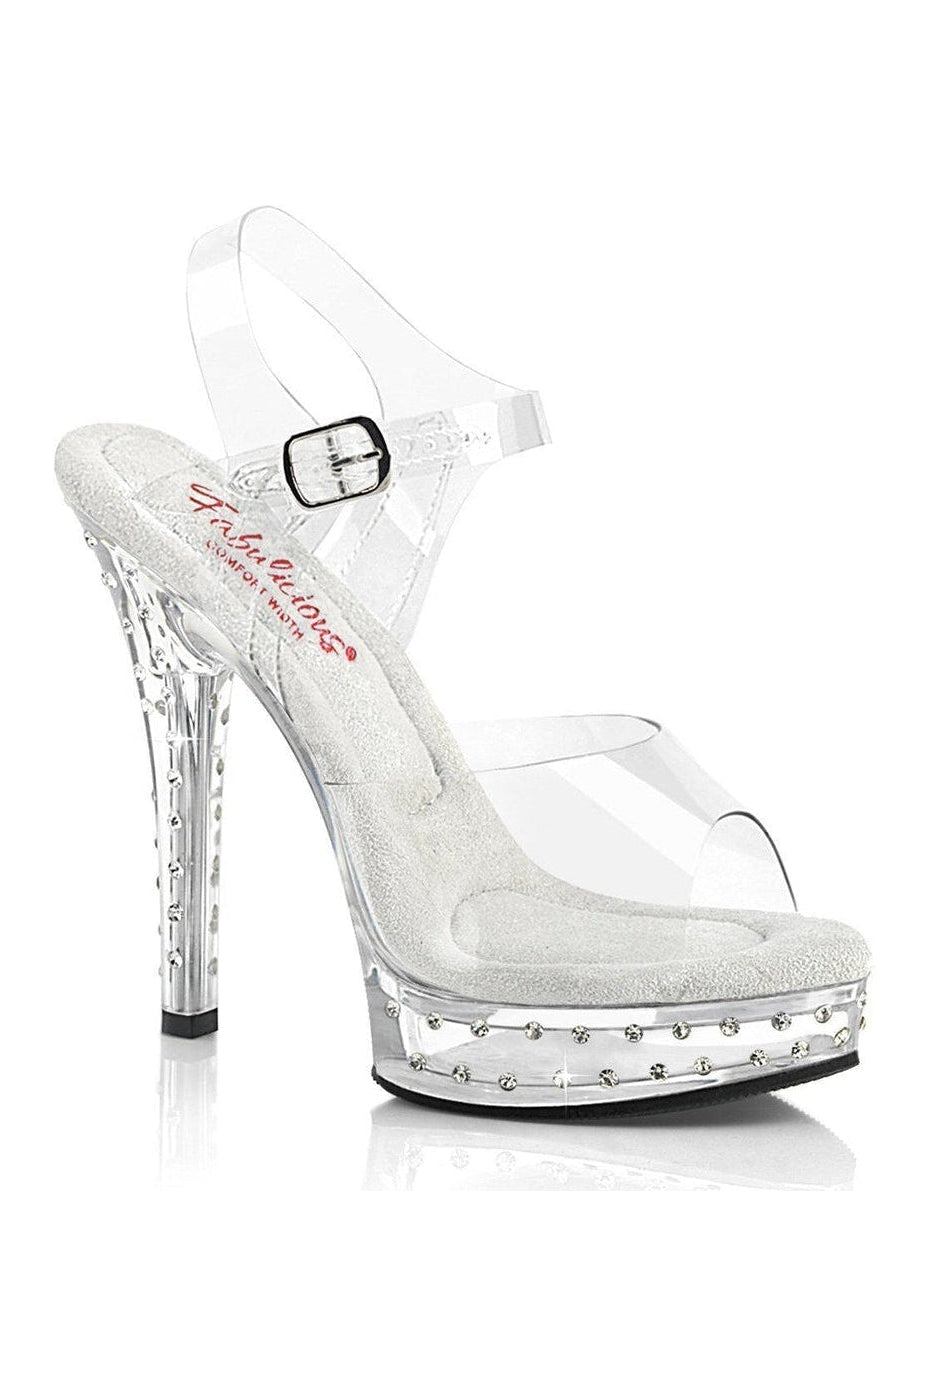 MAJESTY-508SDT Sandal | Clear Vinyl-Sandals-Fabulicious-Clear-7-Vinyl-SEXYSHOES.COM